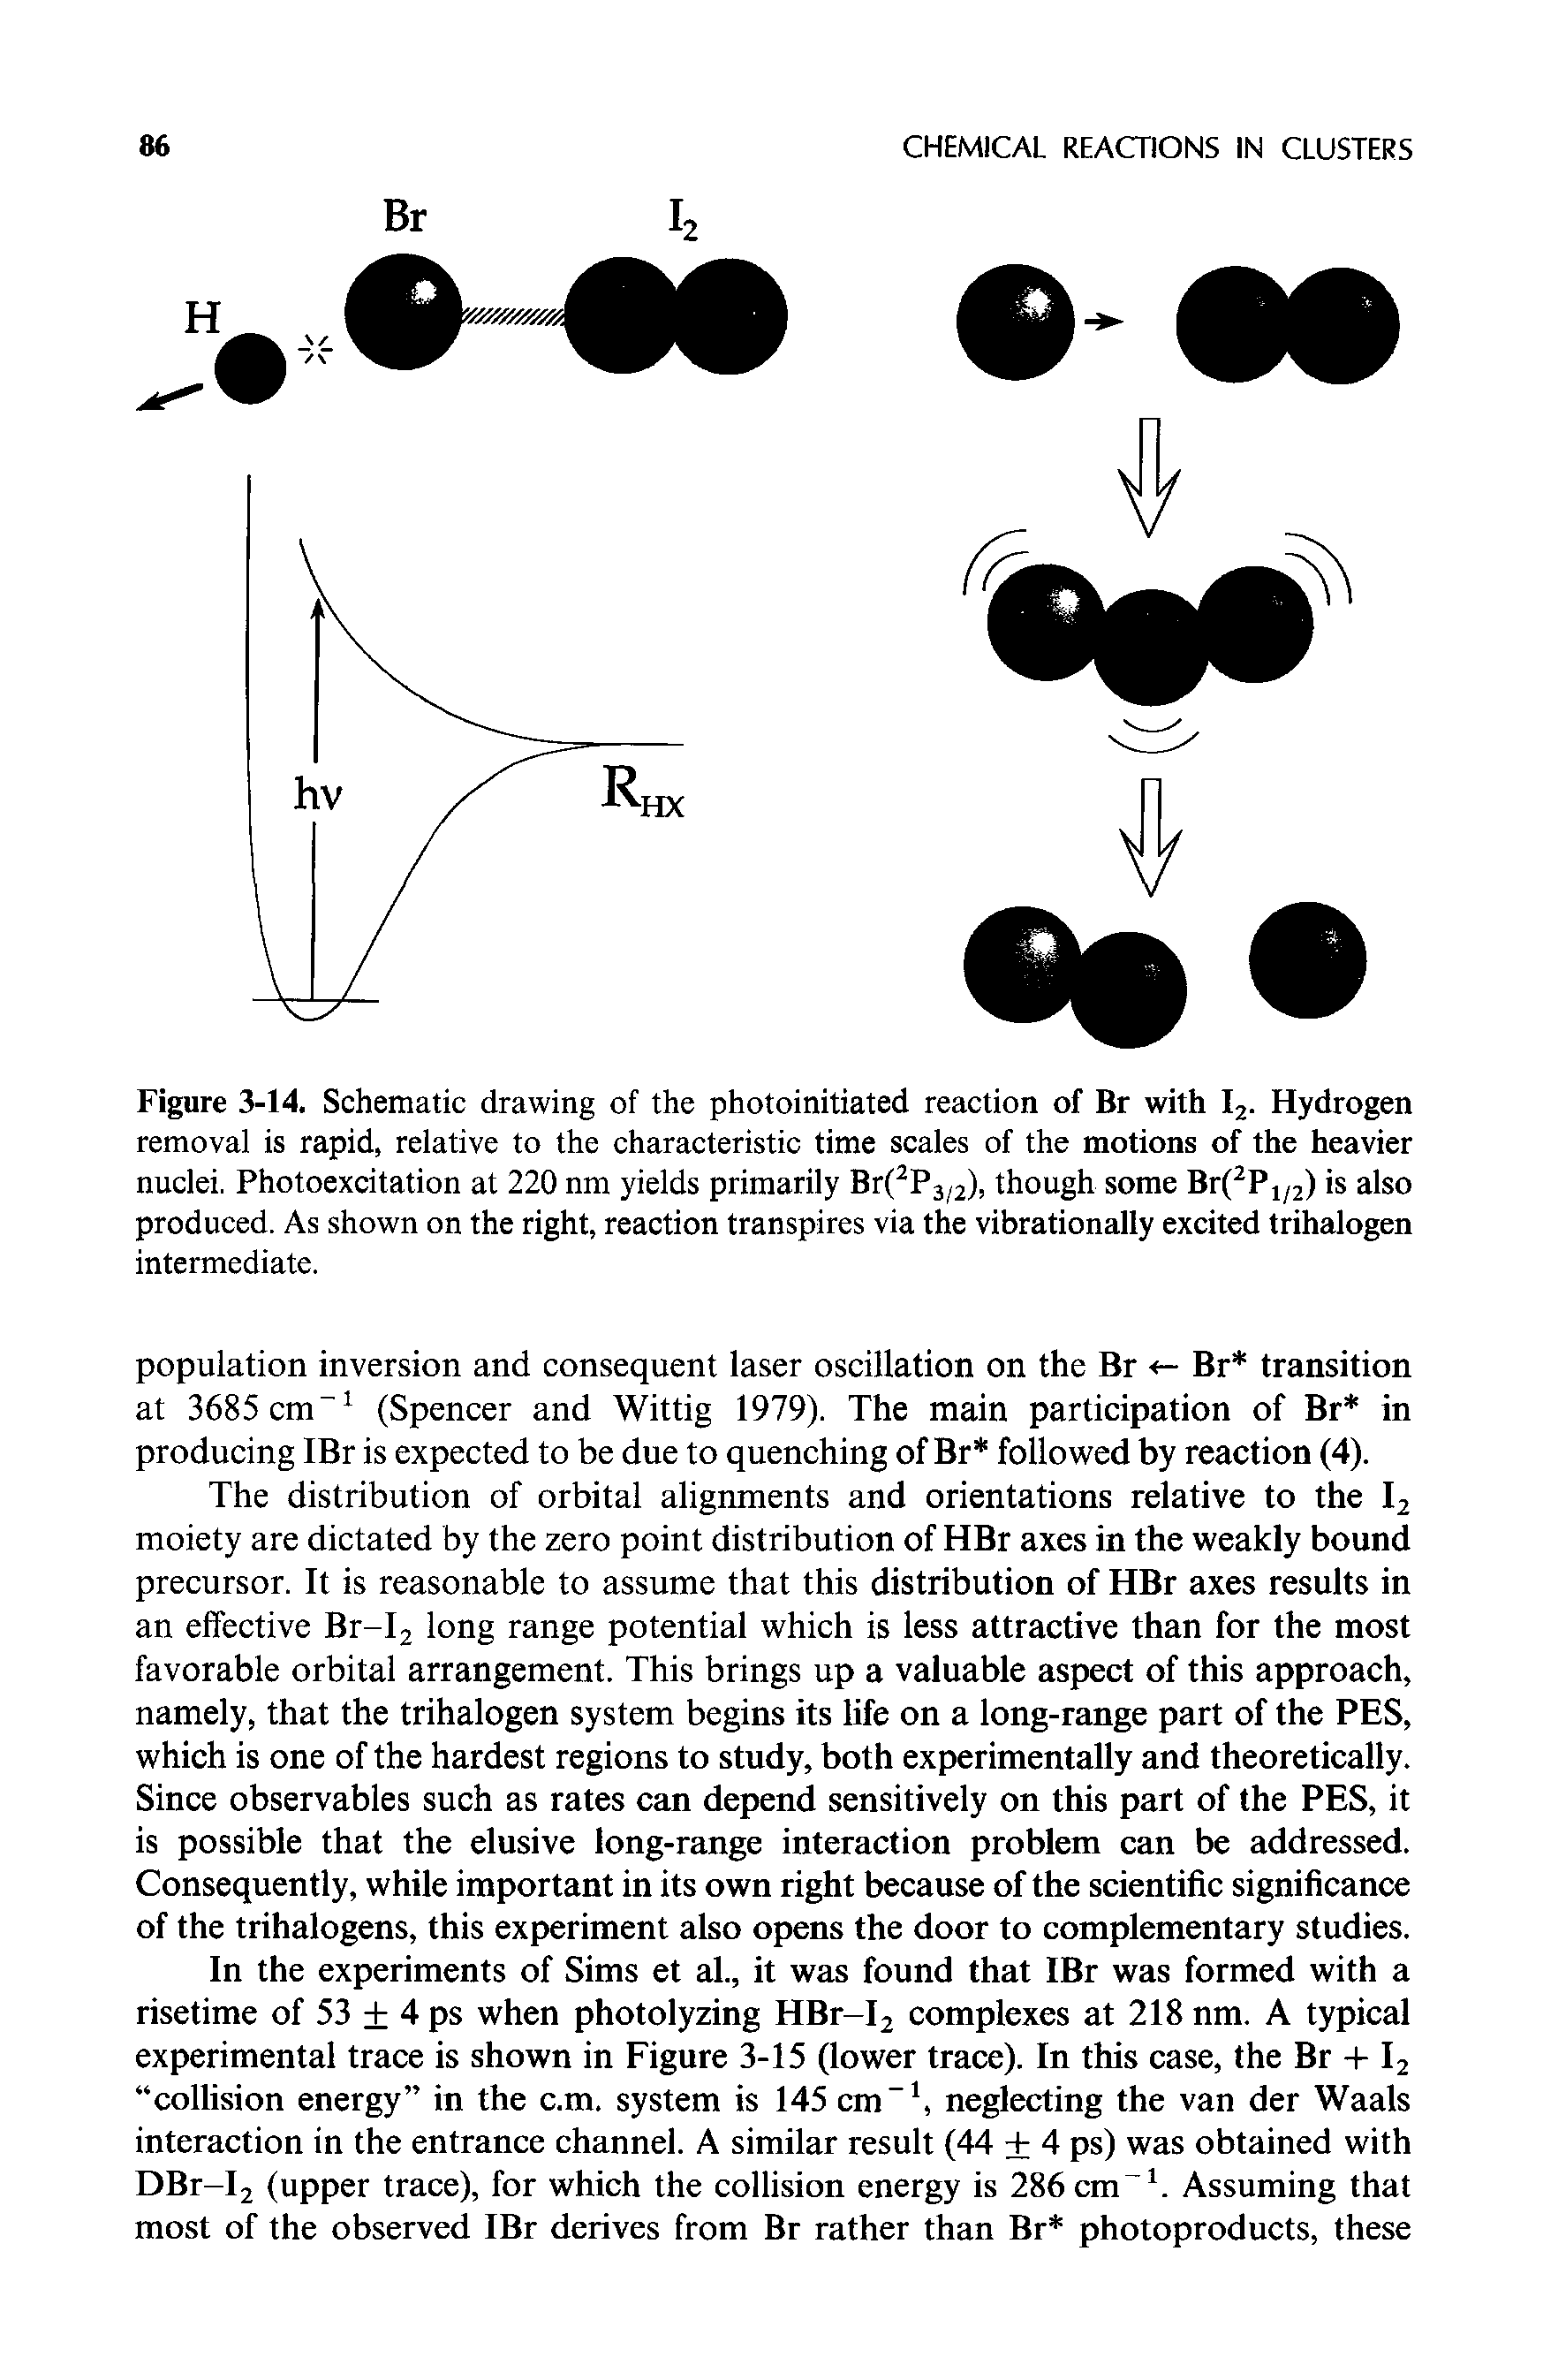 Figure 3-14. Schematic drawing of the photoinitiated reaction of Br with I2. Hydrogen removal is rapid, relative to the characteristic time scales of the motions of the heavier nuclei. Photoexcitation at 220 nm yields primarily Br(2P3/2), though some Br(2P1/2) is also produced. As shown on the right, reaction transpires via the vibrationally excited trihalogen intermediate.